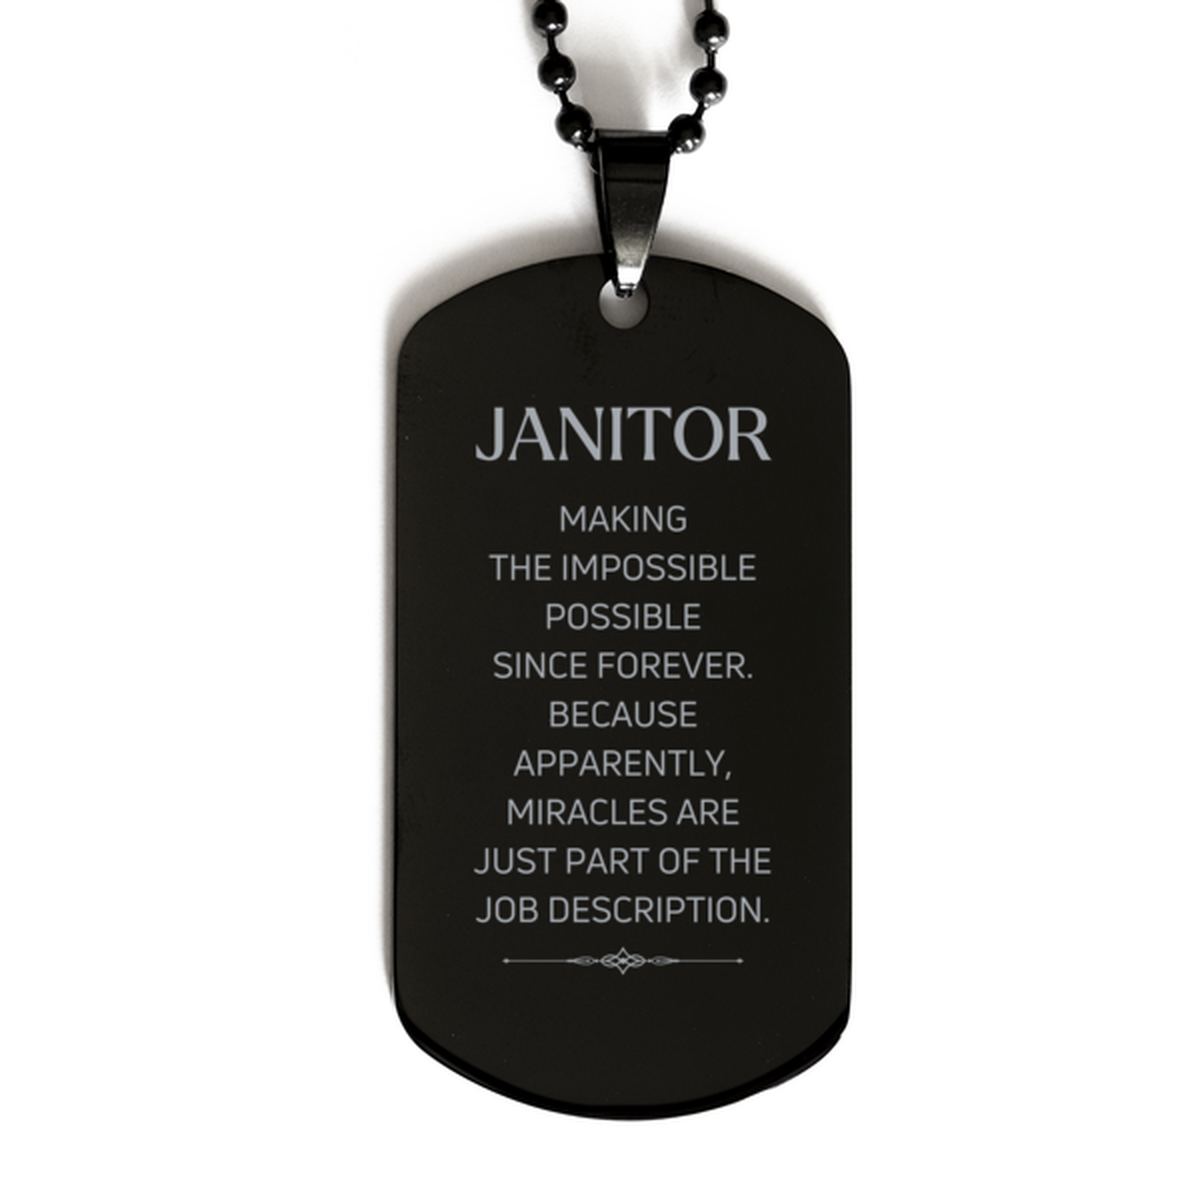 Funny Janitor Gifts, Miracles are just part of the job description, Inspirational Birthday Black Dog Tag For Janitor, Men, Women, Coworkers, Friends, Boss